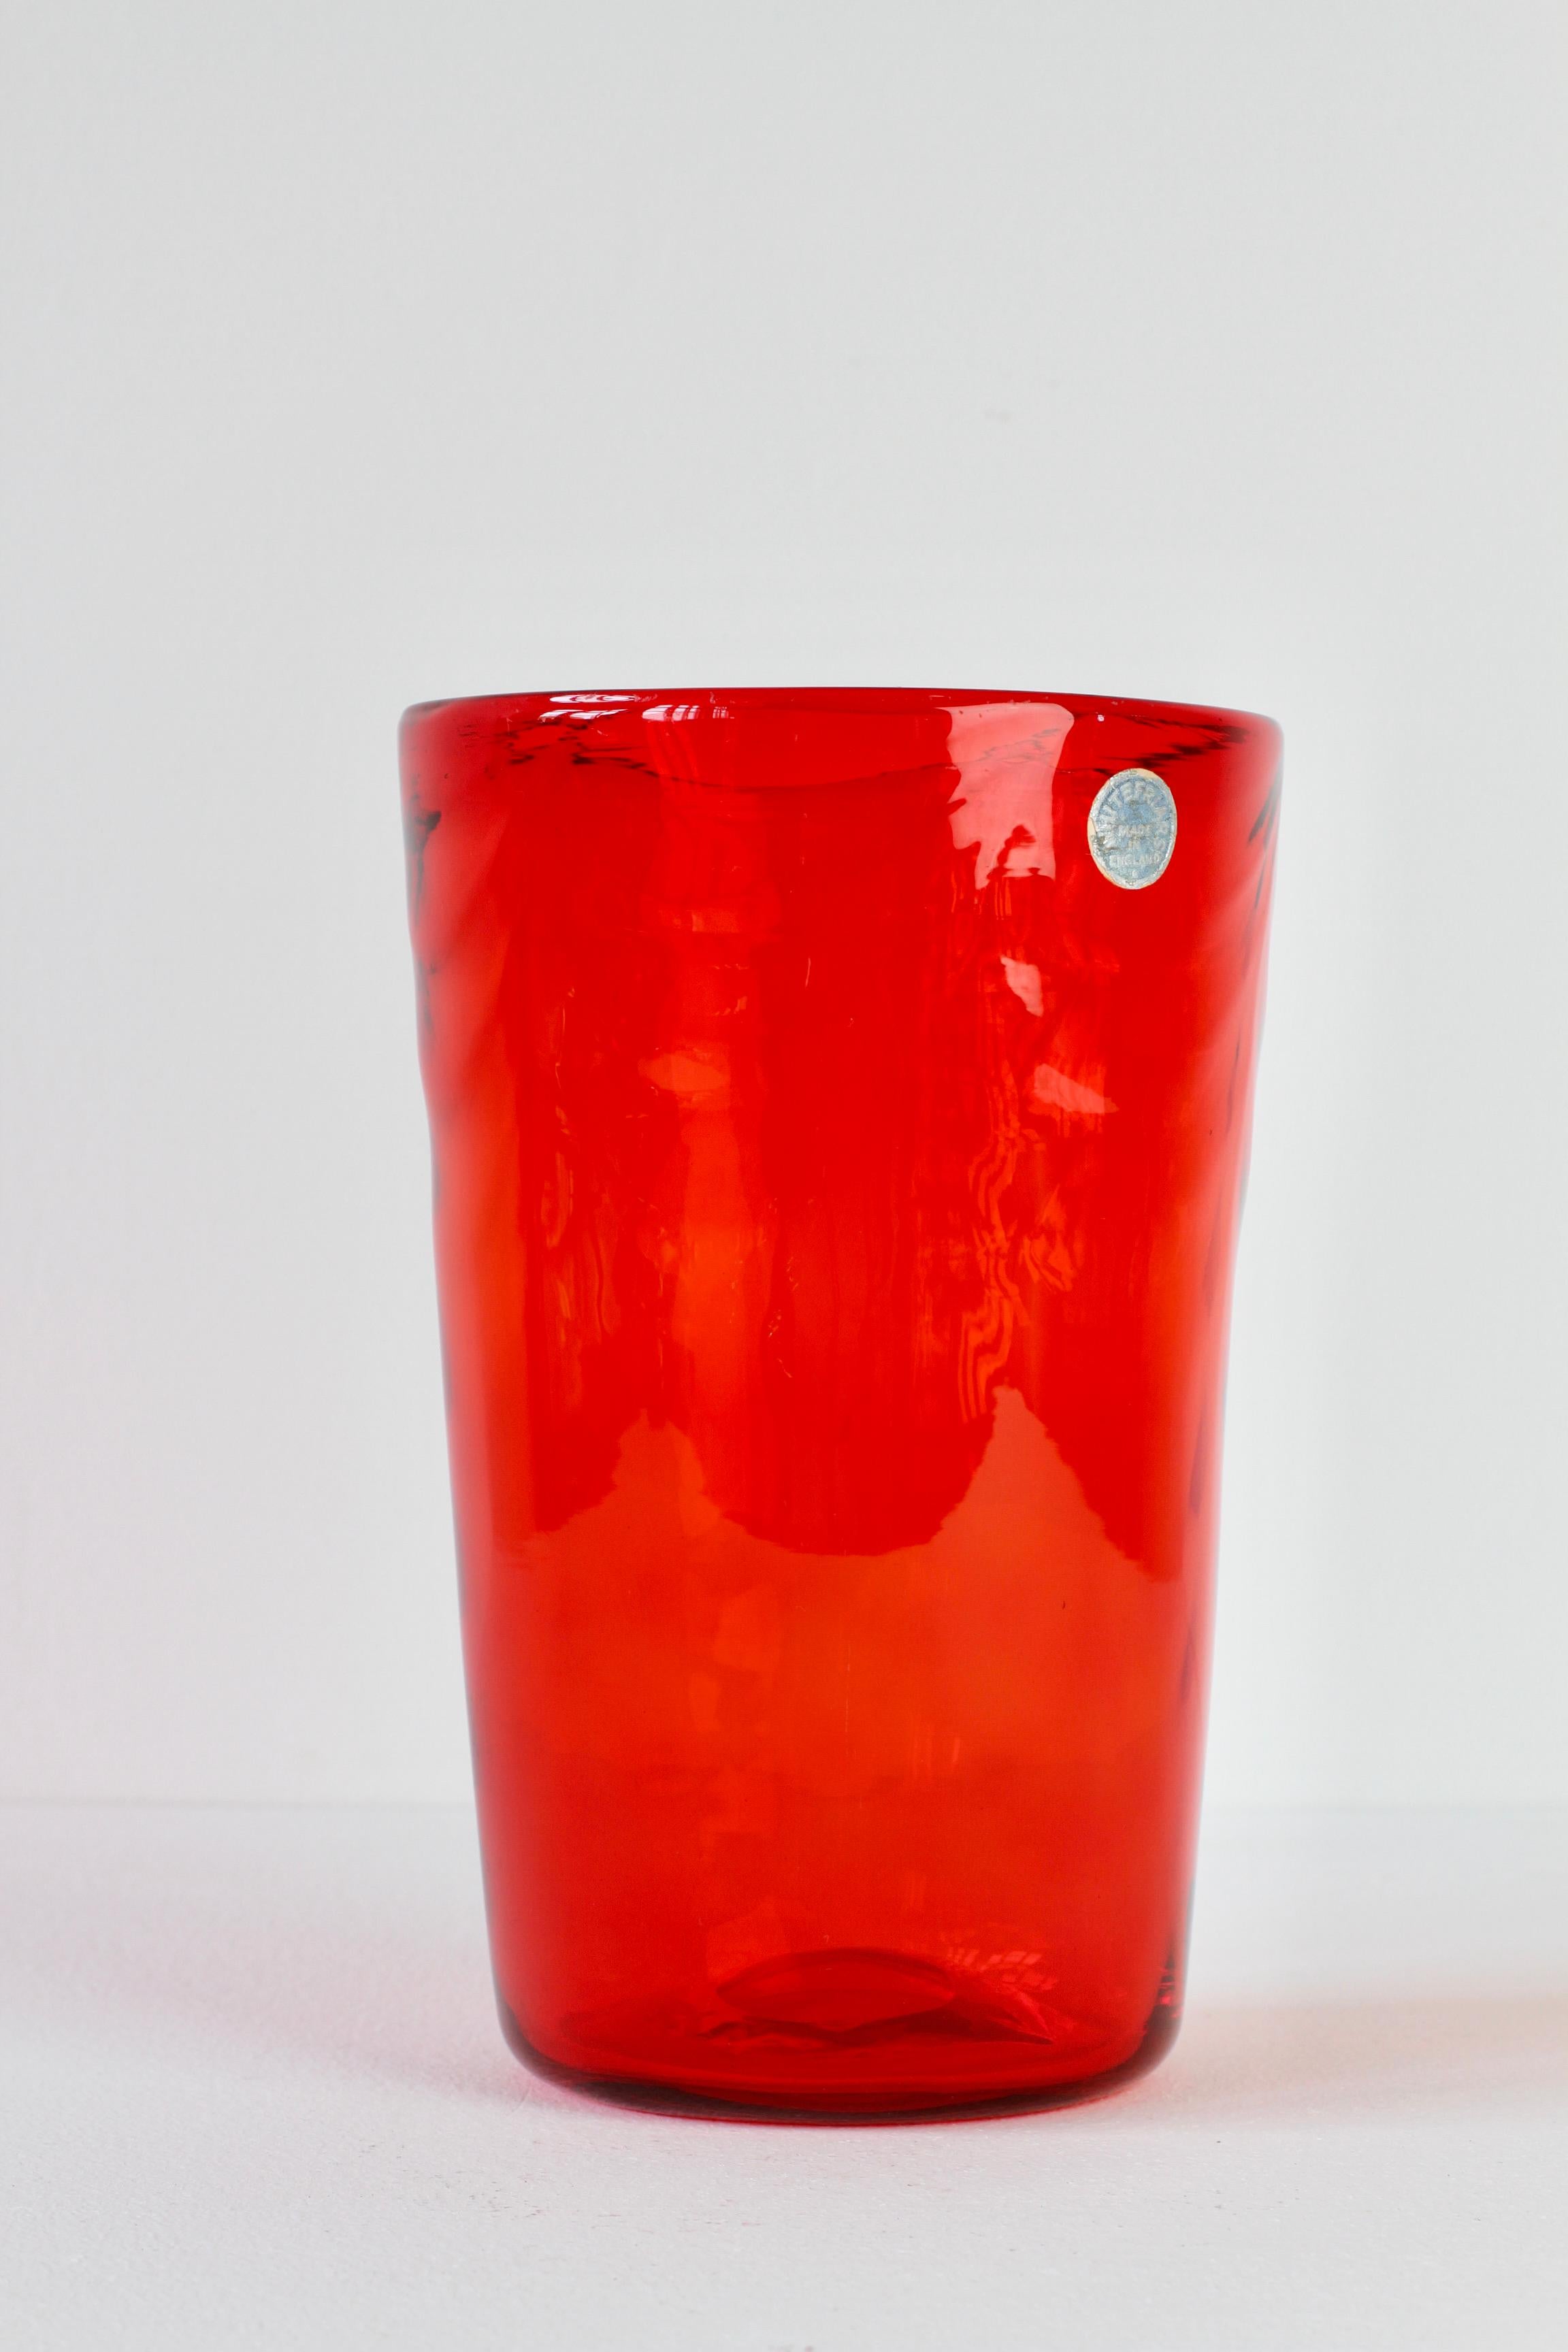 Molded Whitefriars Vintage Vibrant Red Glass Vase by Barnaby Marriott Powel, C. 1940 For Sale